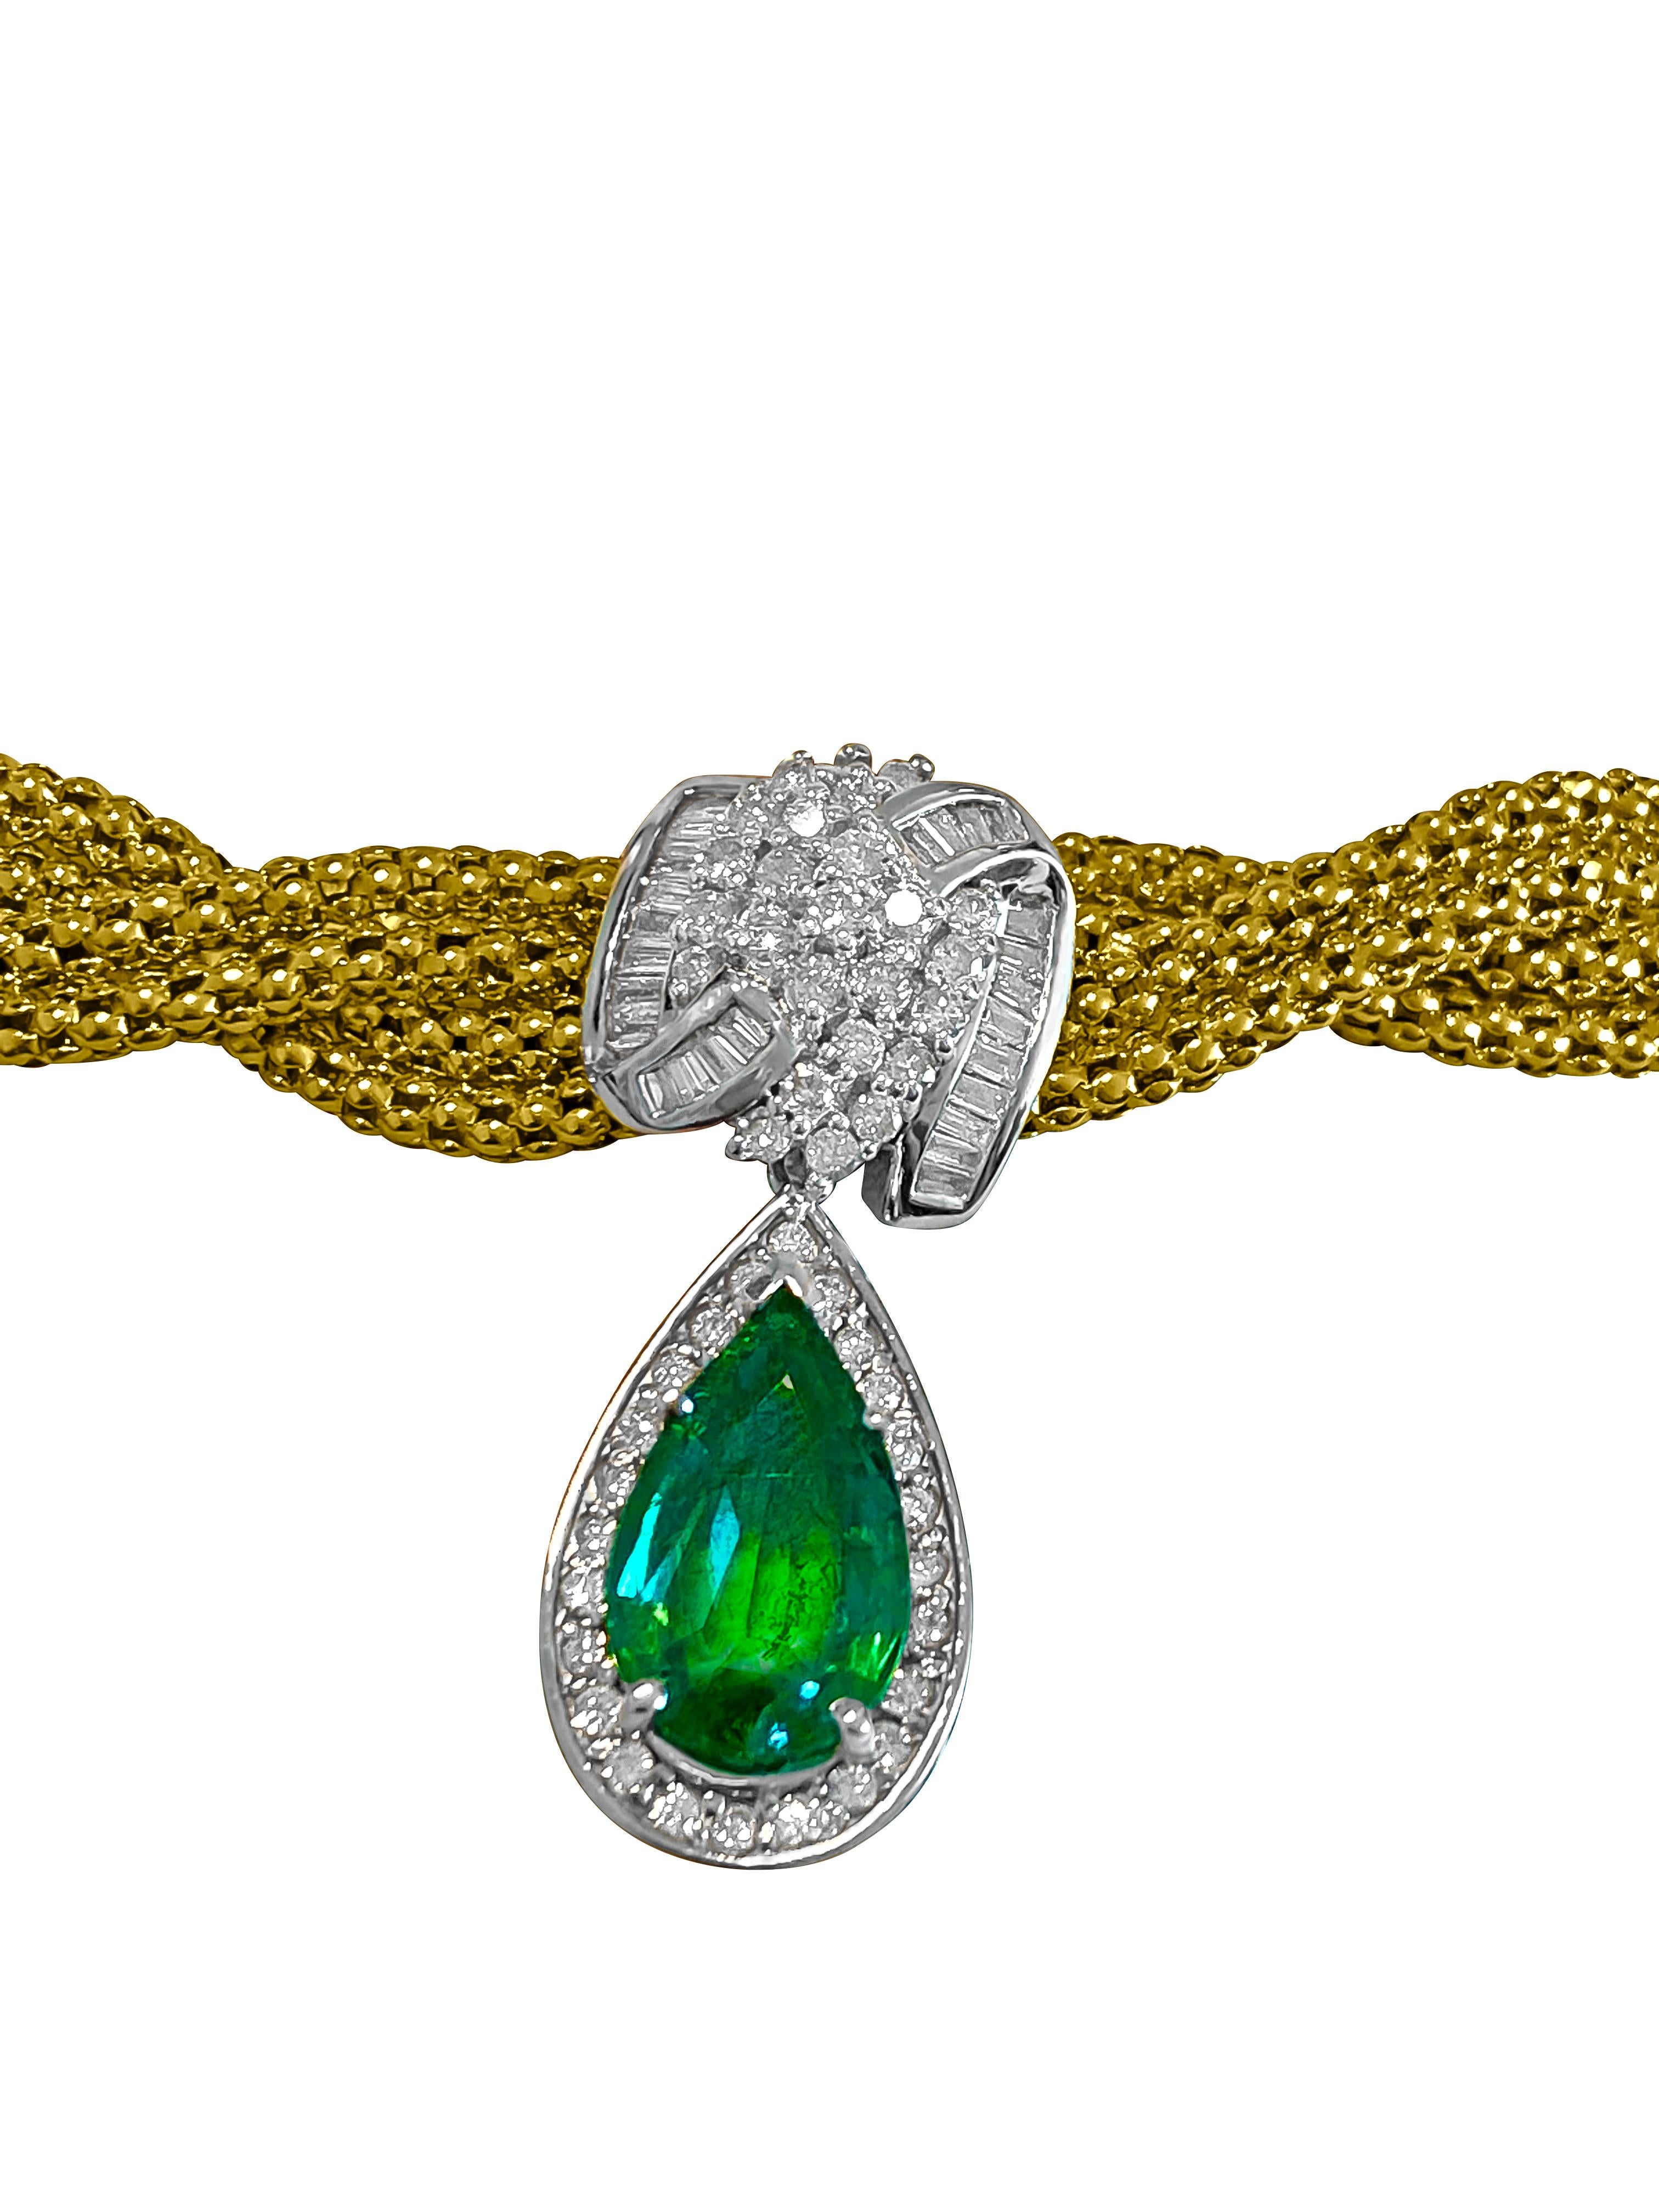 Victorian 14k Gold Emerald Diamond Necklace Certified For Sale